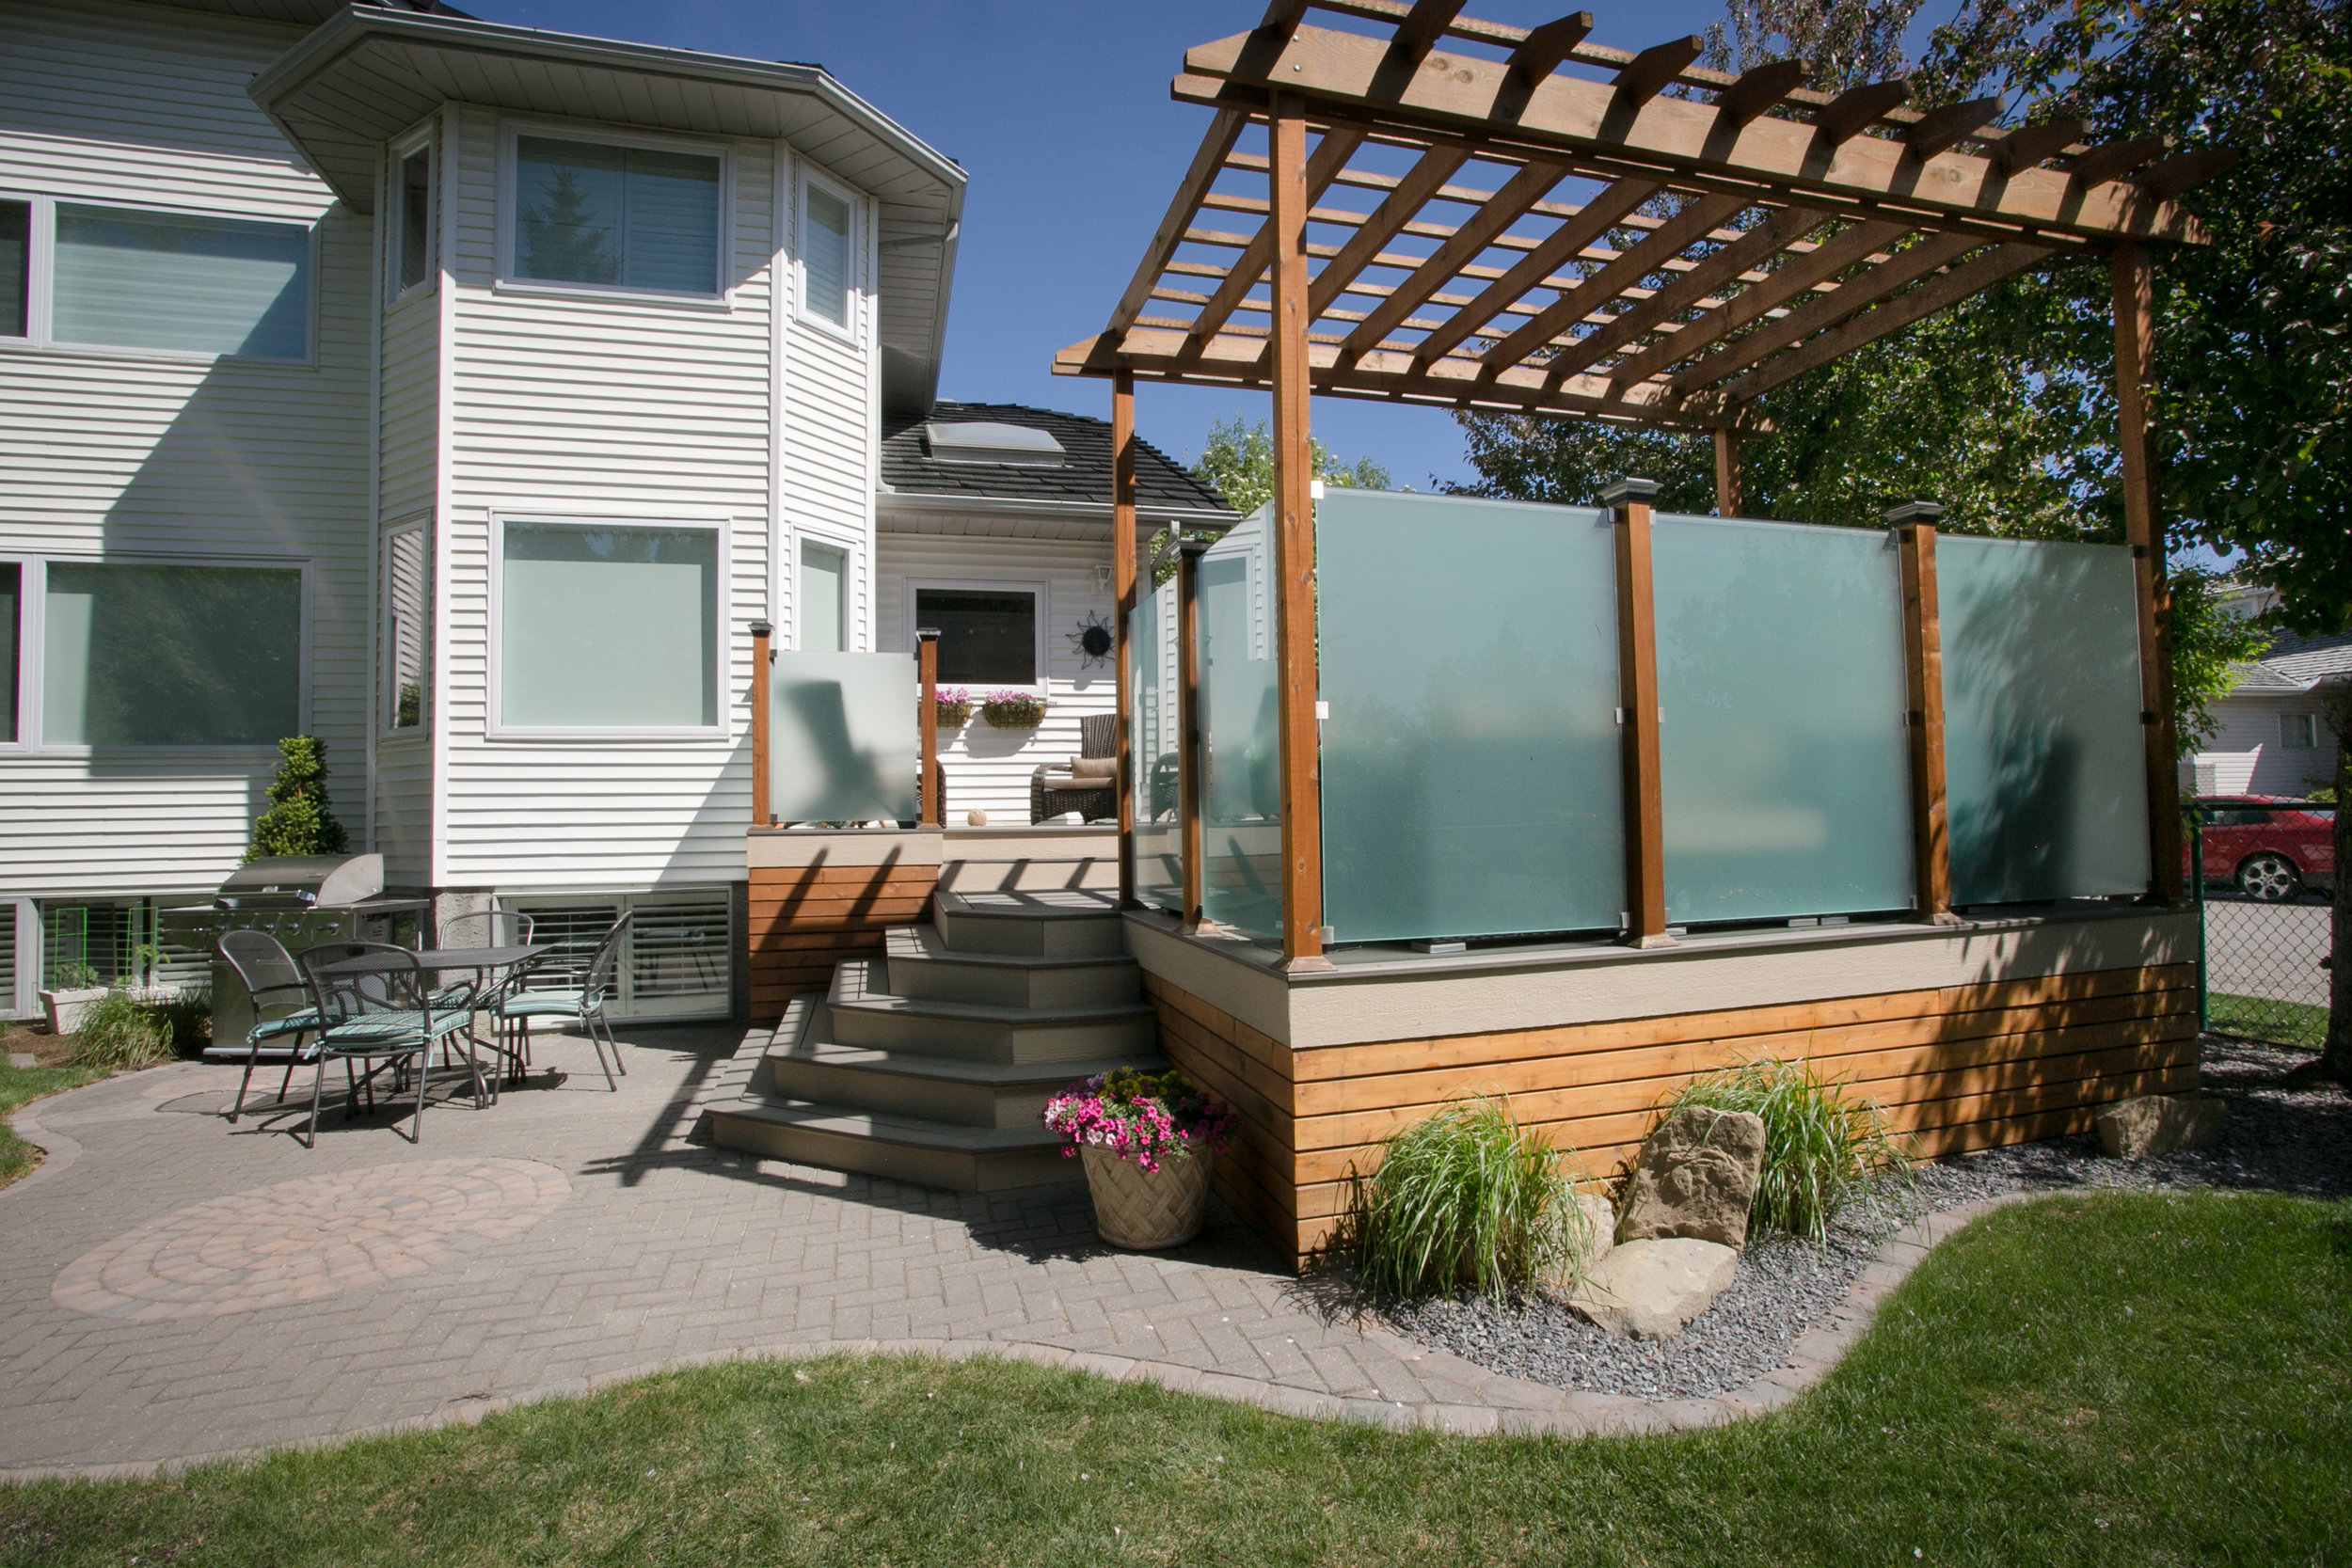  Shaped paving stone patio, plant beds, custom deck with privacy panels and pergola — Valley Ridge, Calgary. 